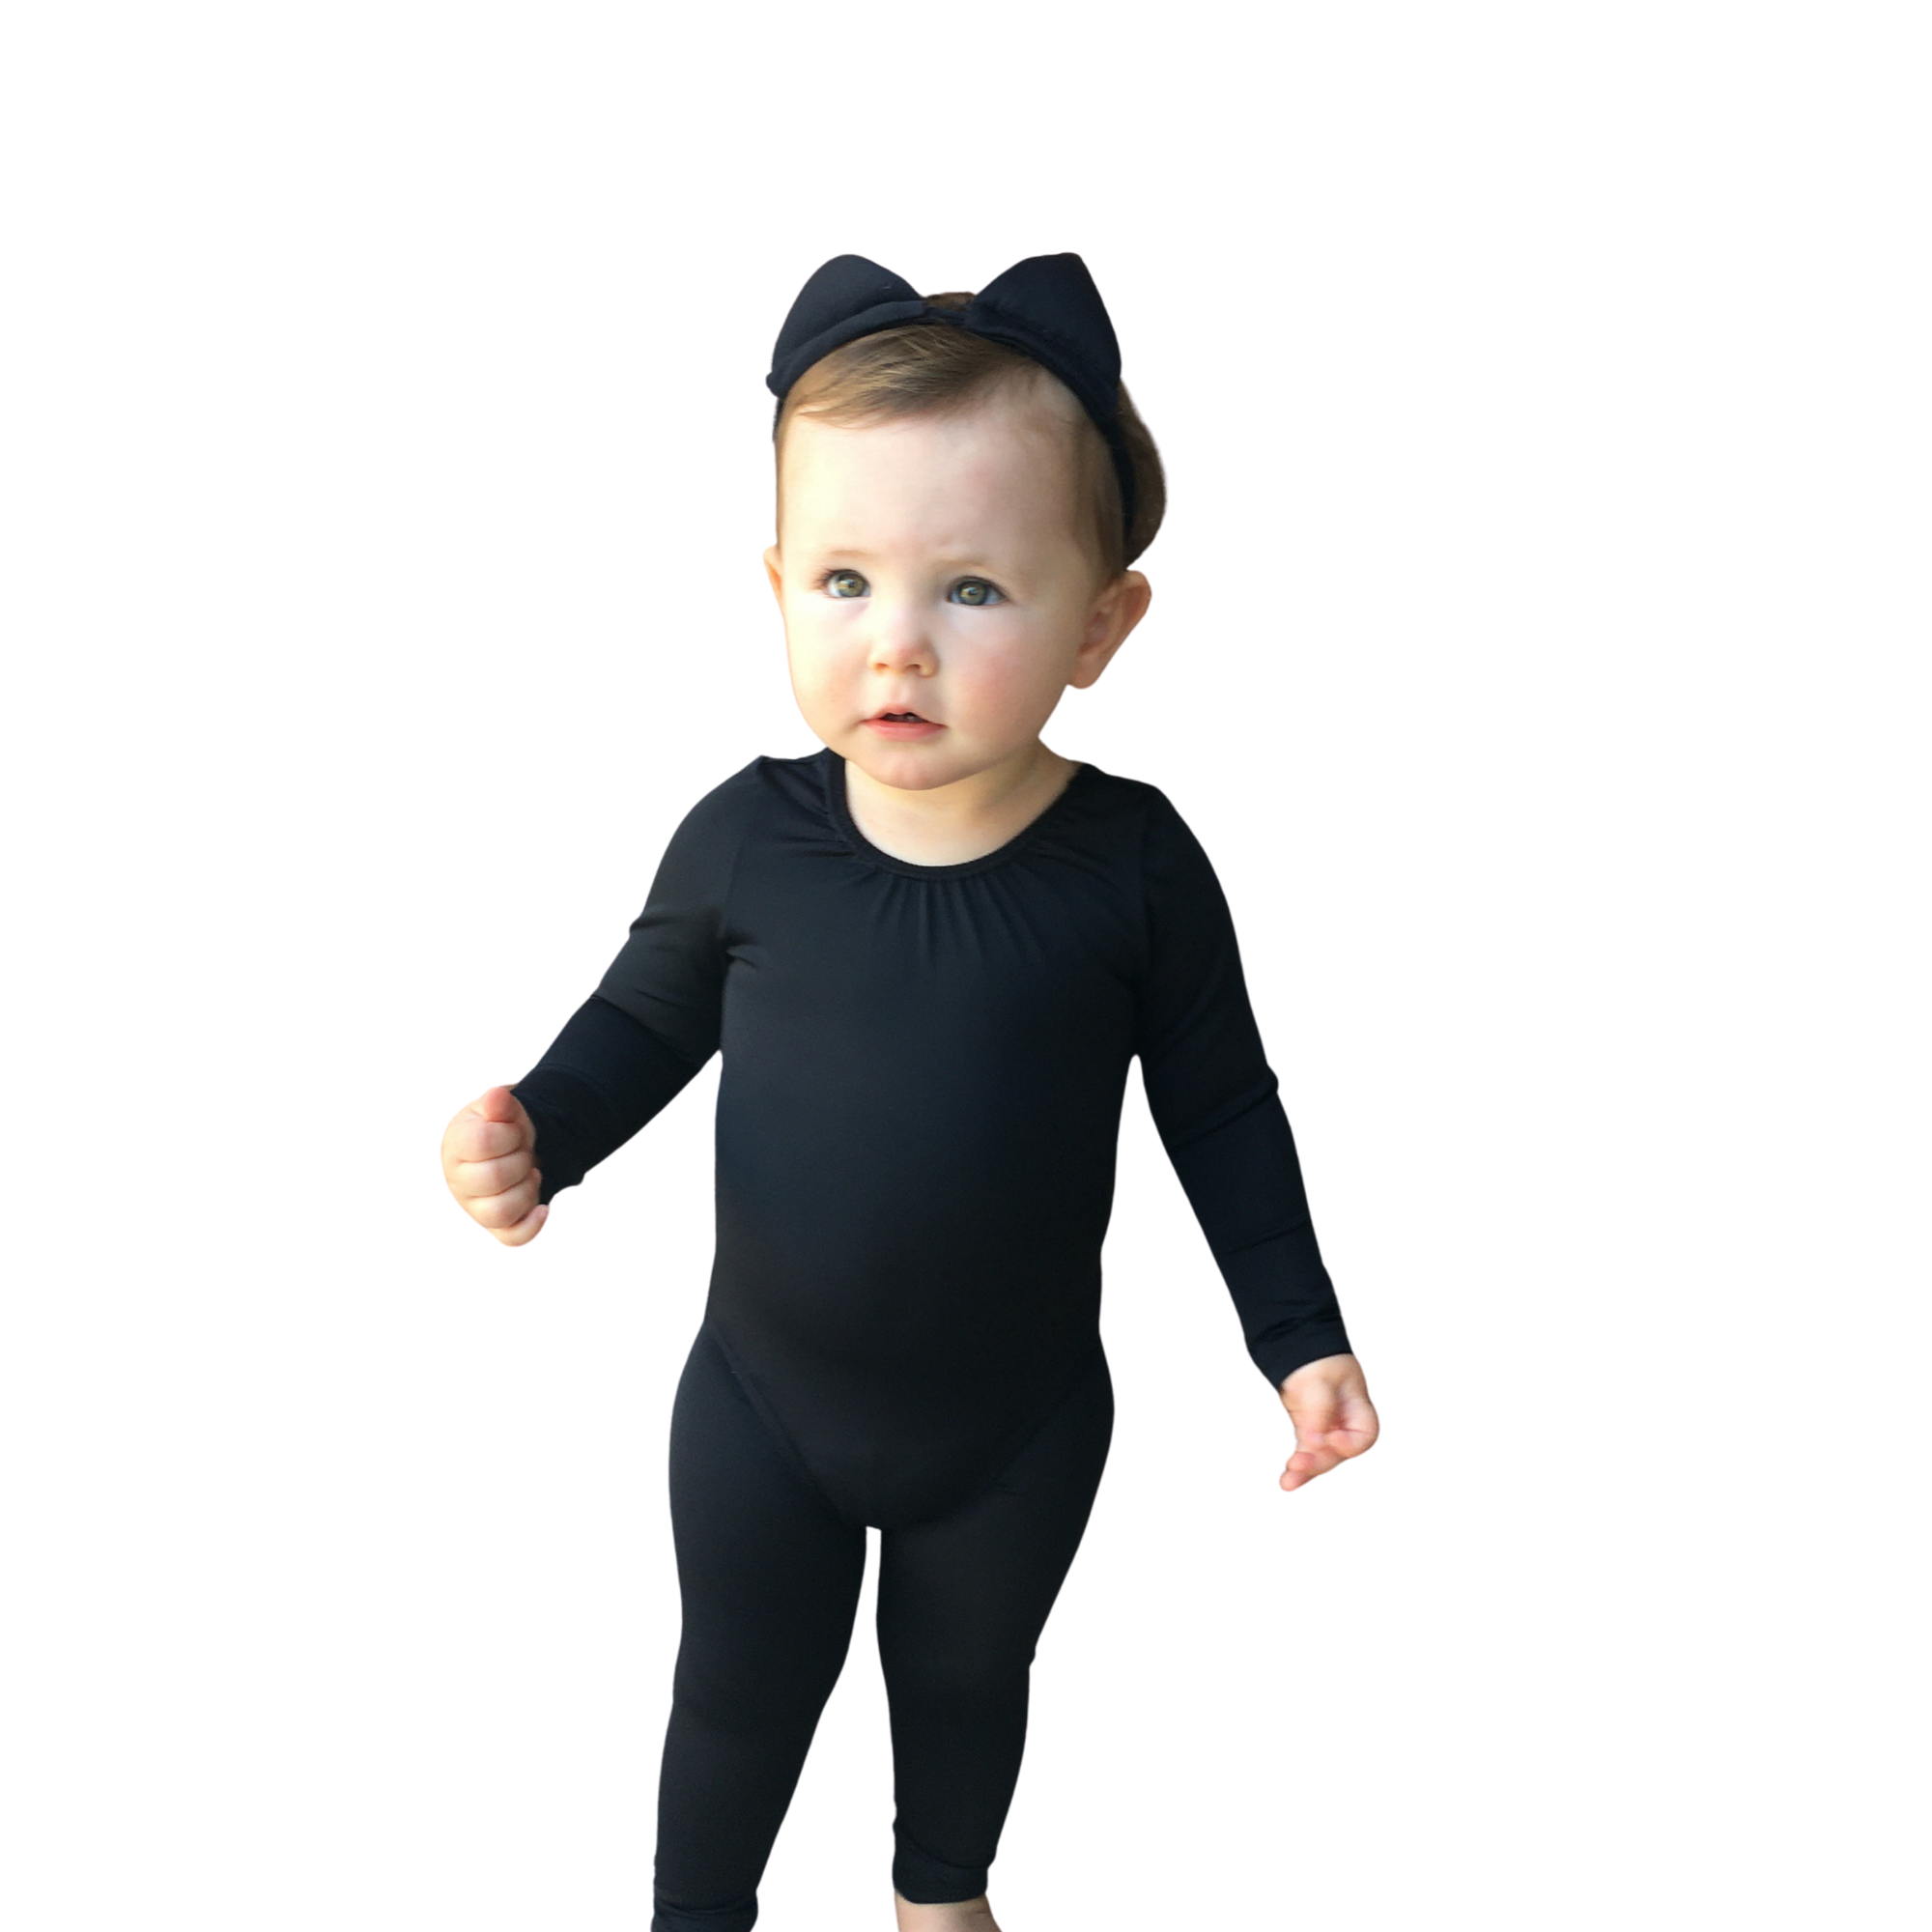 Infant in a black cat costume. Black long sleeve leotard with attached tail in back not pictured.  Black ankle leggings and black ear headband. nylon spandex fabric for a slick fit.